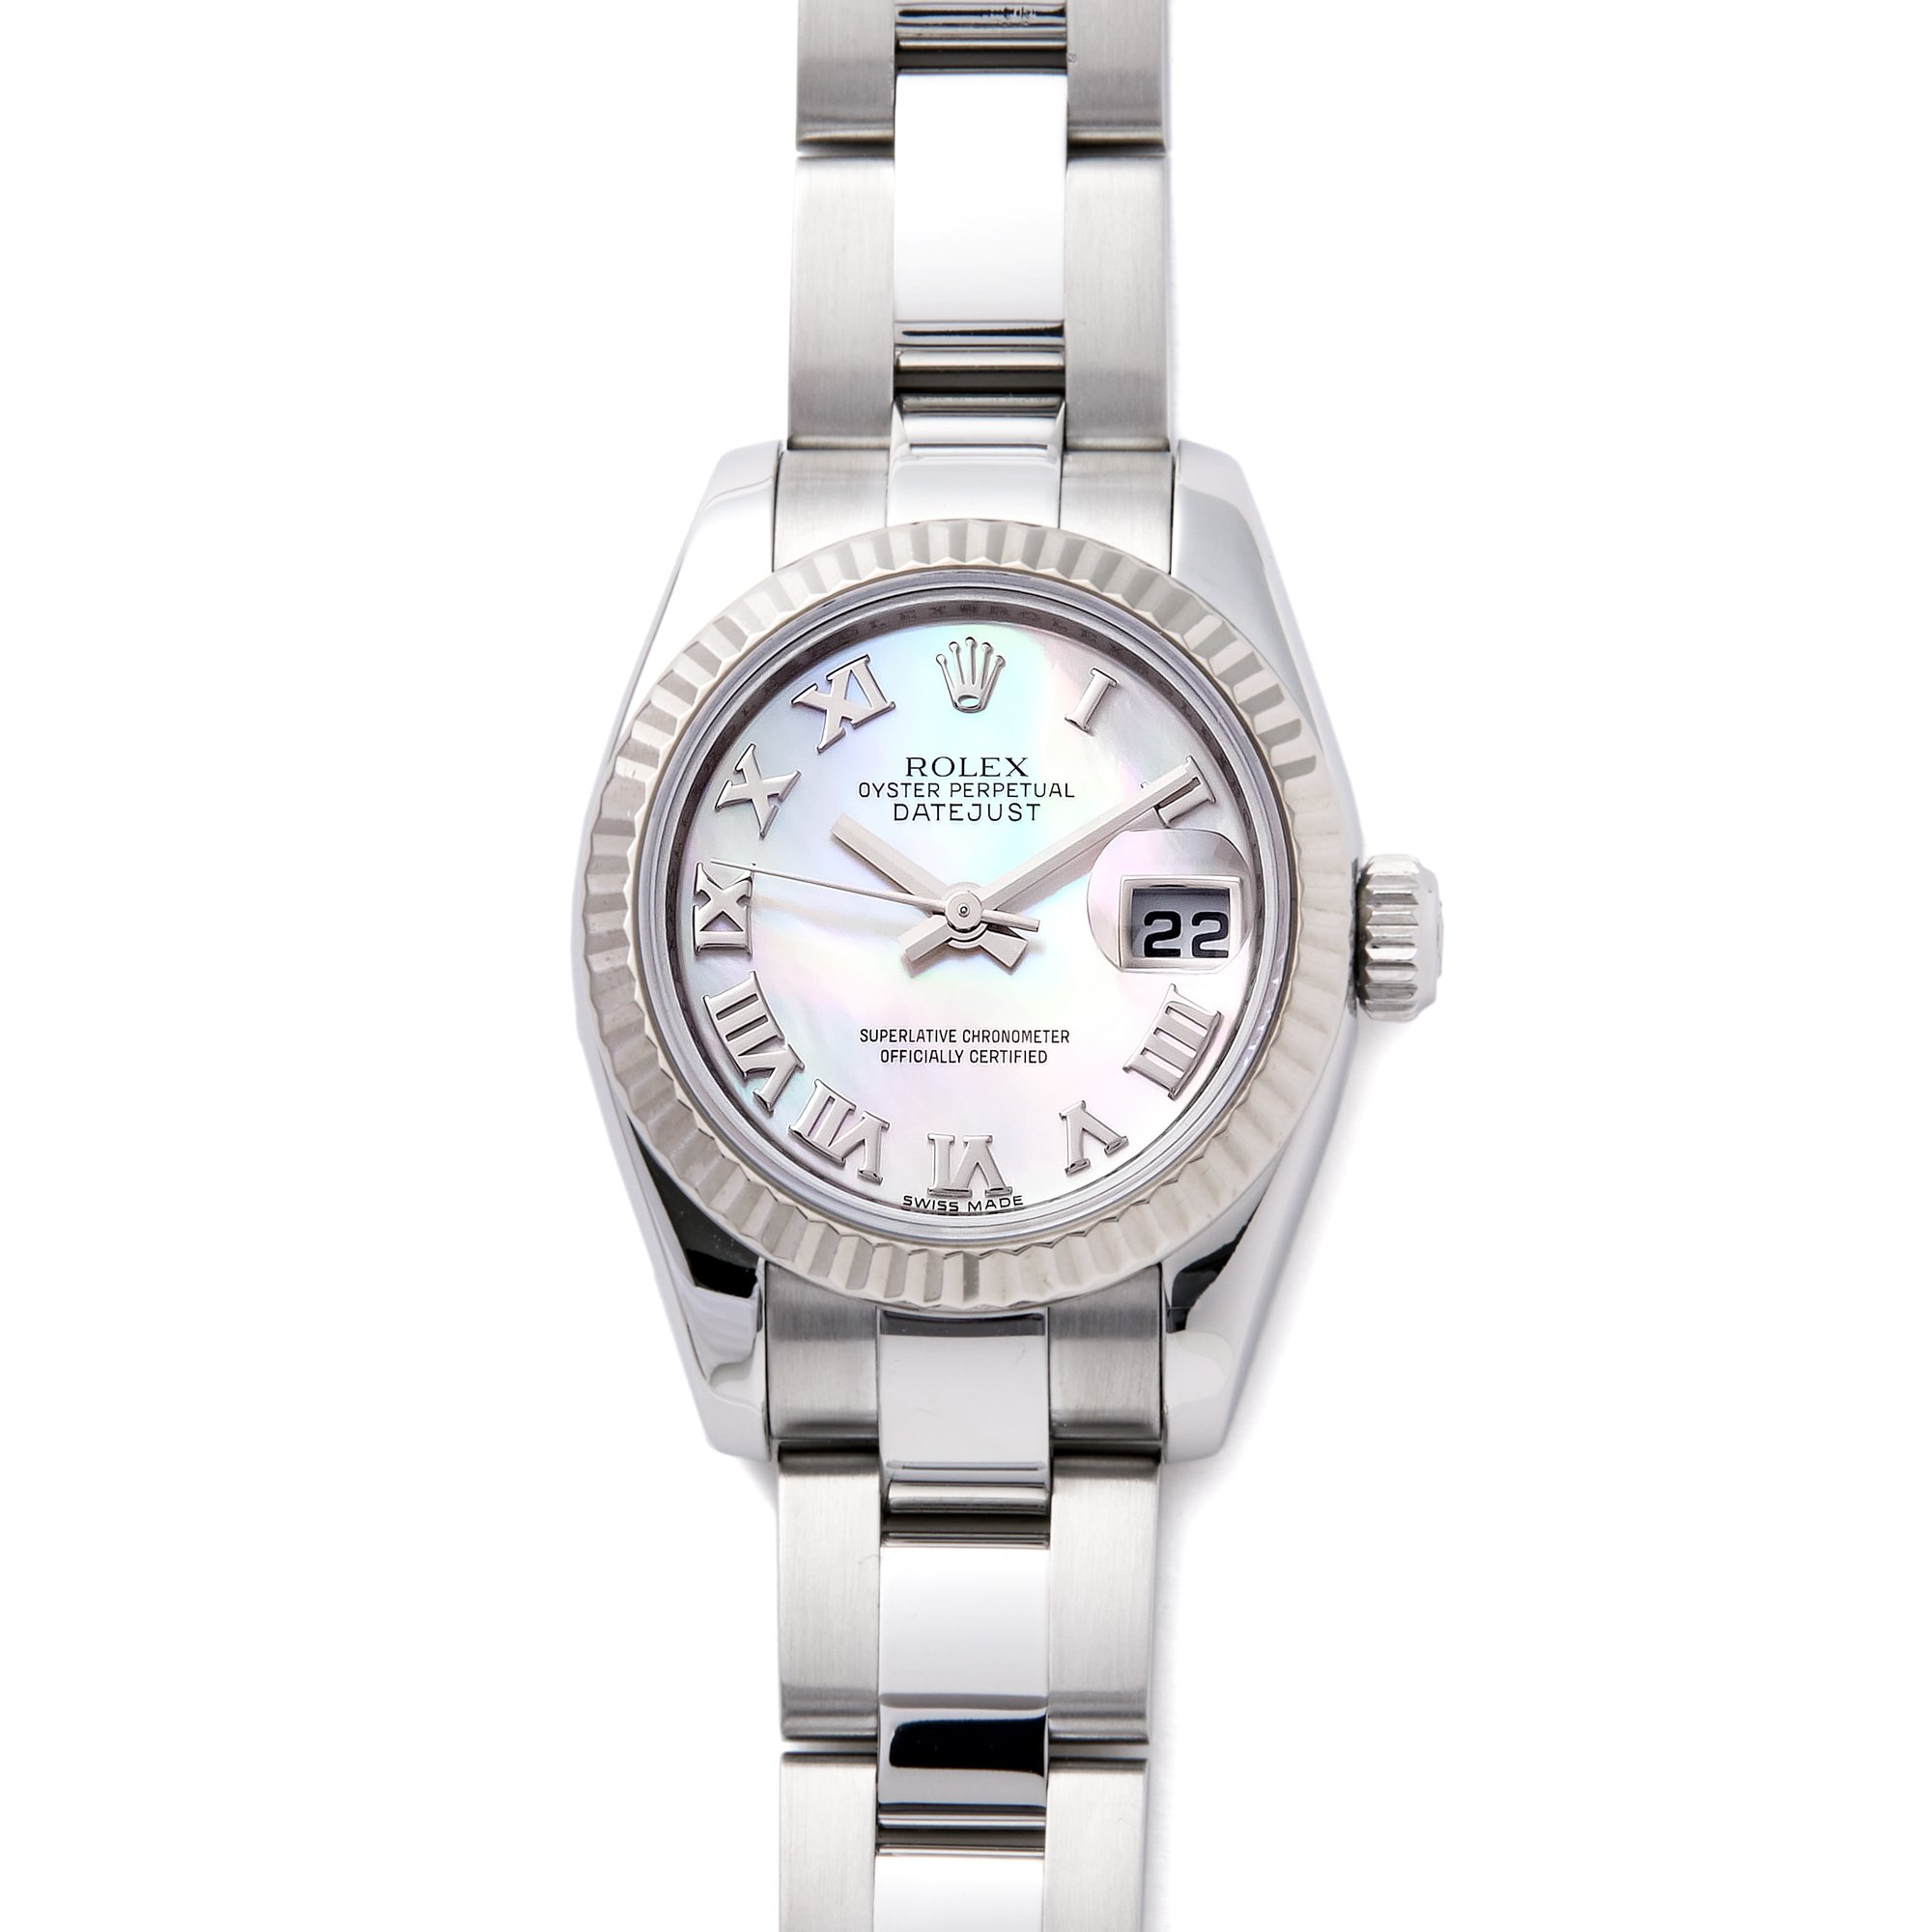 Rolex Datejust 26 Mother of Pearl White Gold & Stainless Steel 179174